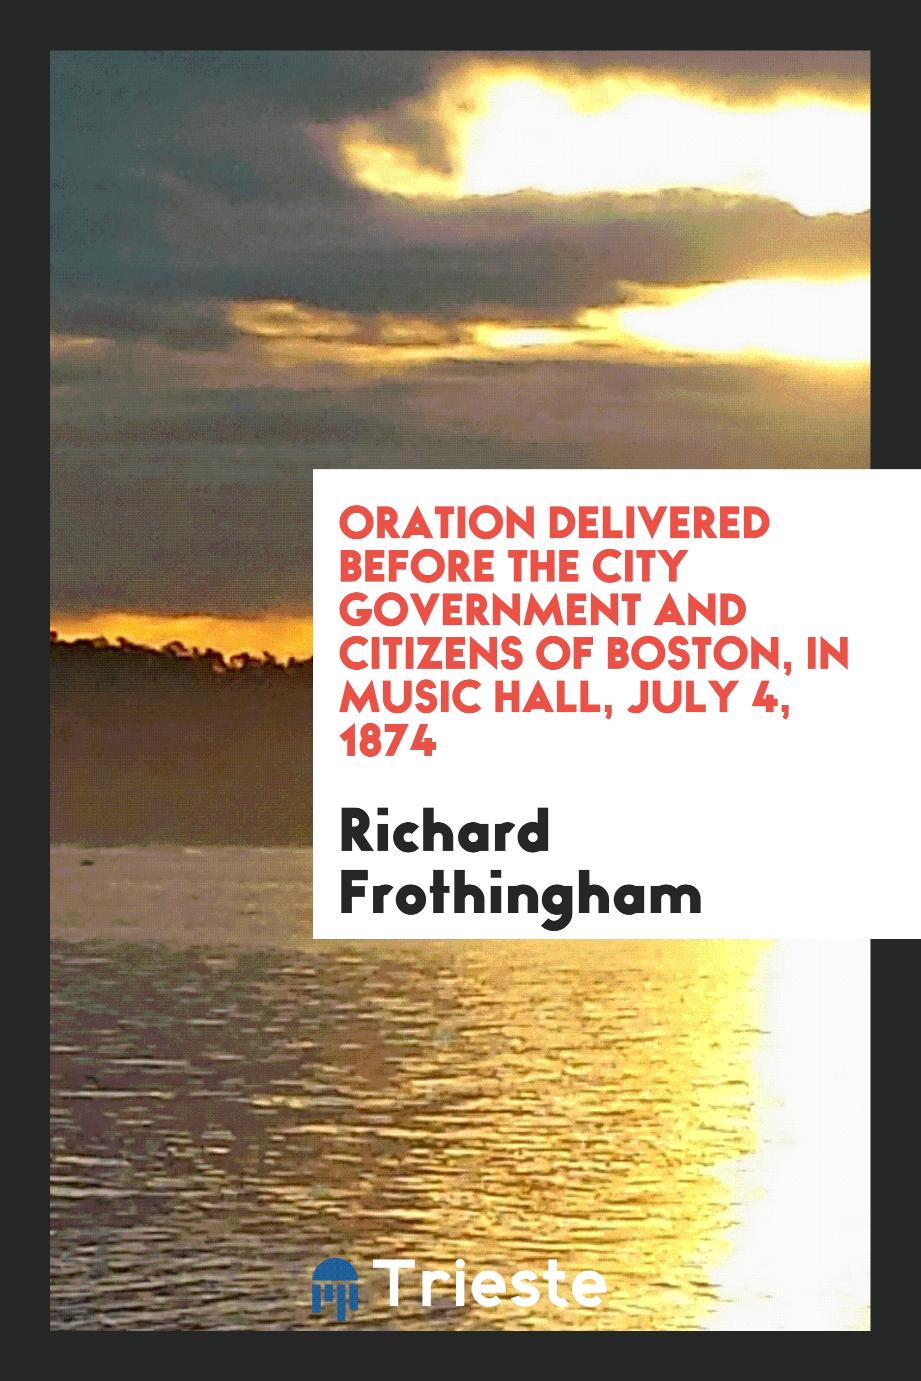 Richard Frothingham - Oration delivered before the city government and citizens of Boston, in Music hall, July 4, 1874